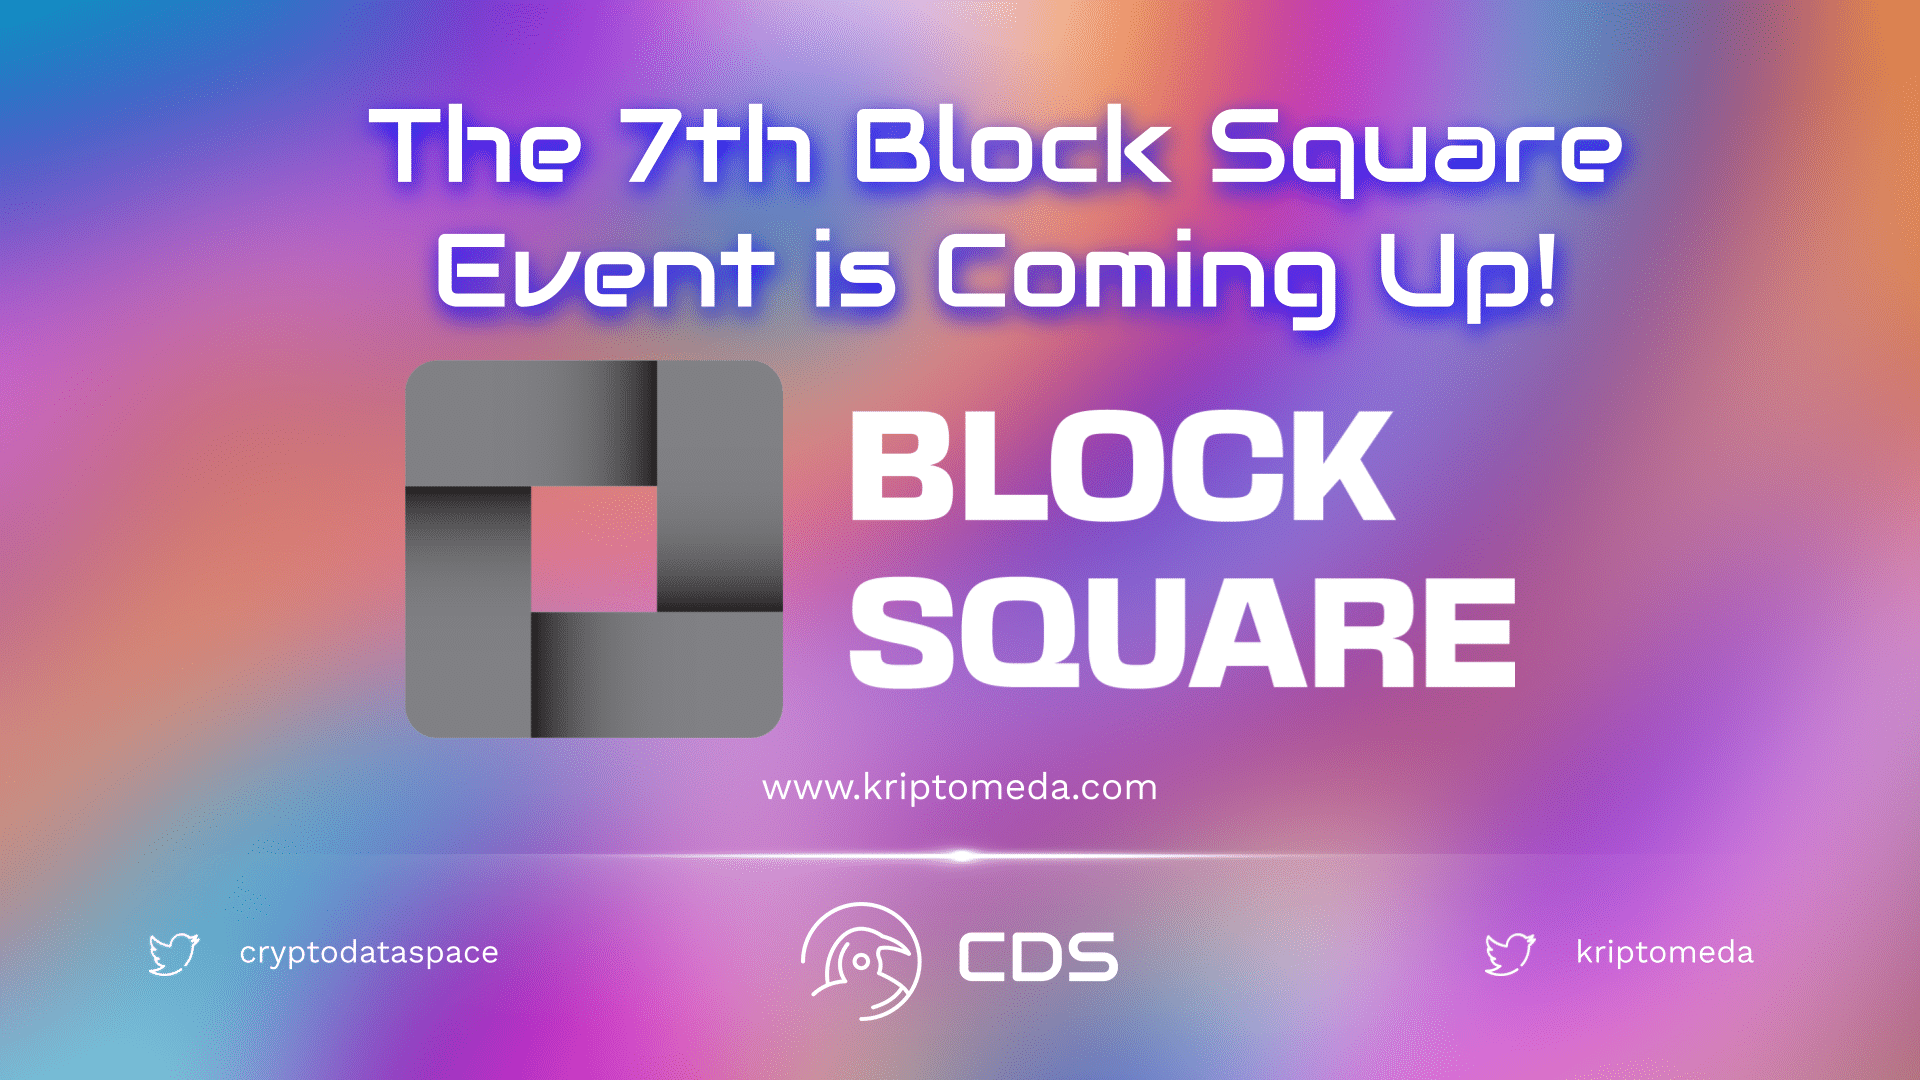 The 7th Block Square Event is Coming Up!